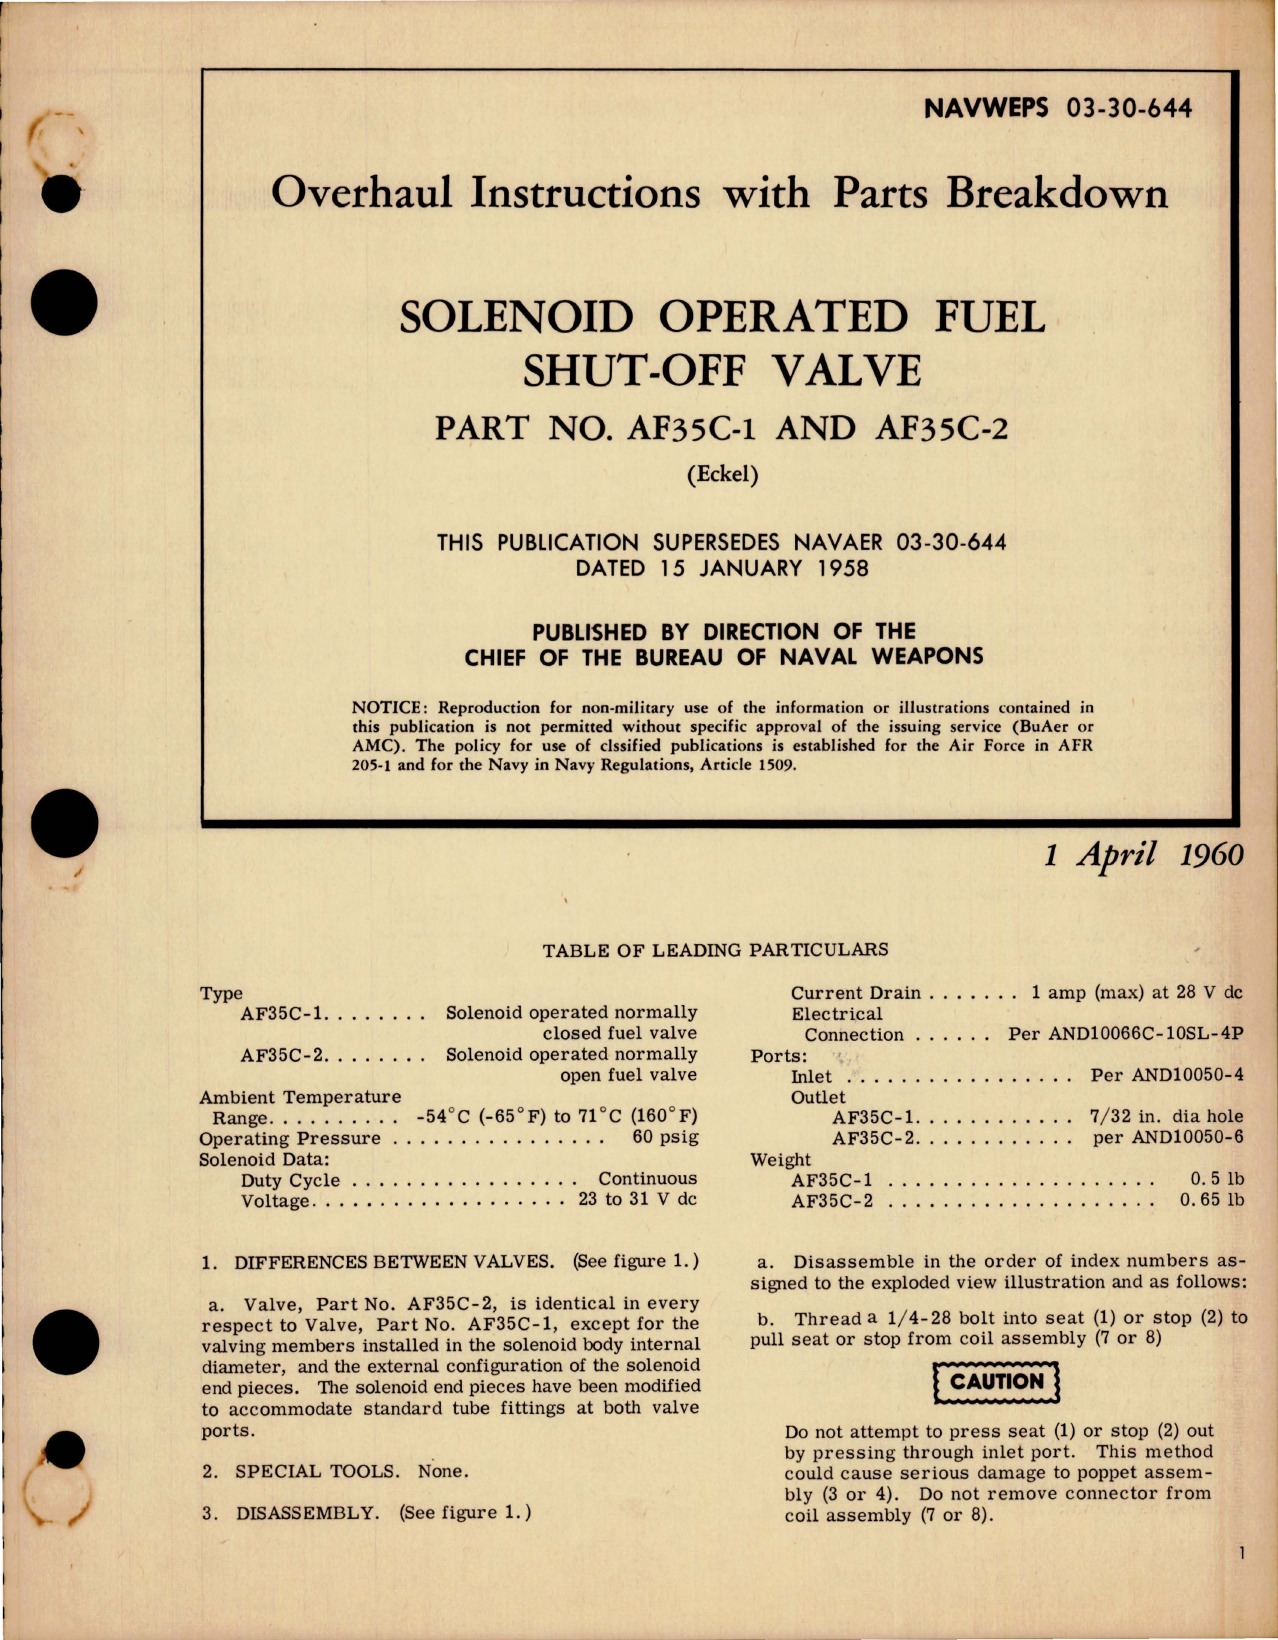 Sample page 1 from AirCorps Library document: Overhaul Instructions with Parts for Solenoid Operated Fuel Shut-Off Valve - Parts AF35C-1 and AF35C-2 